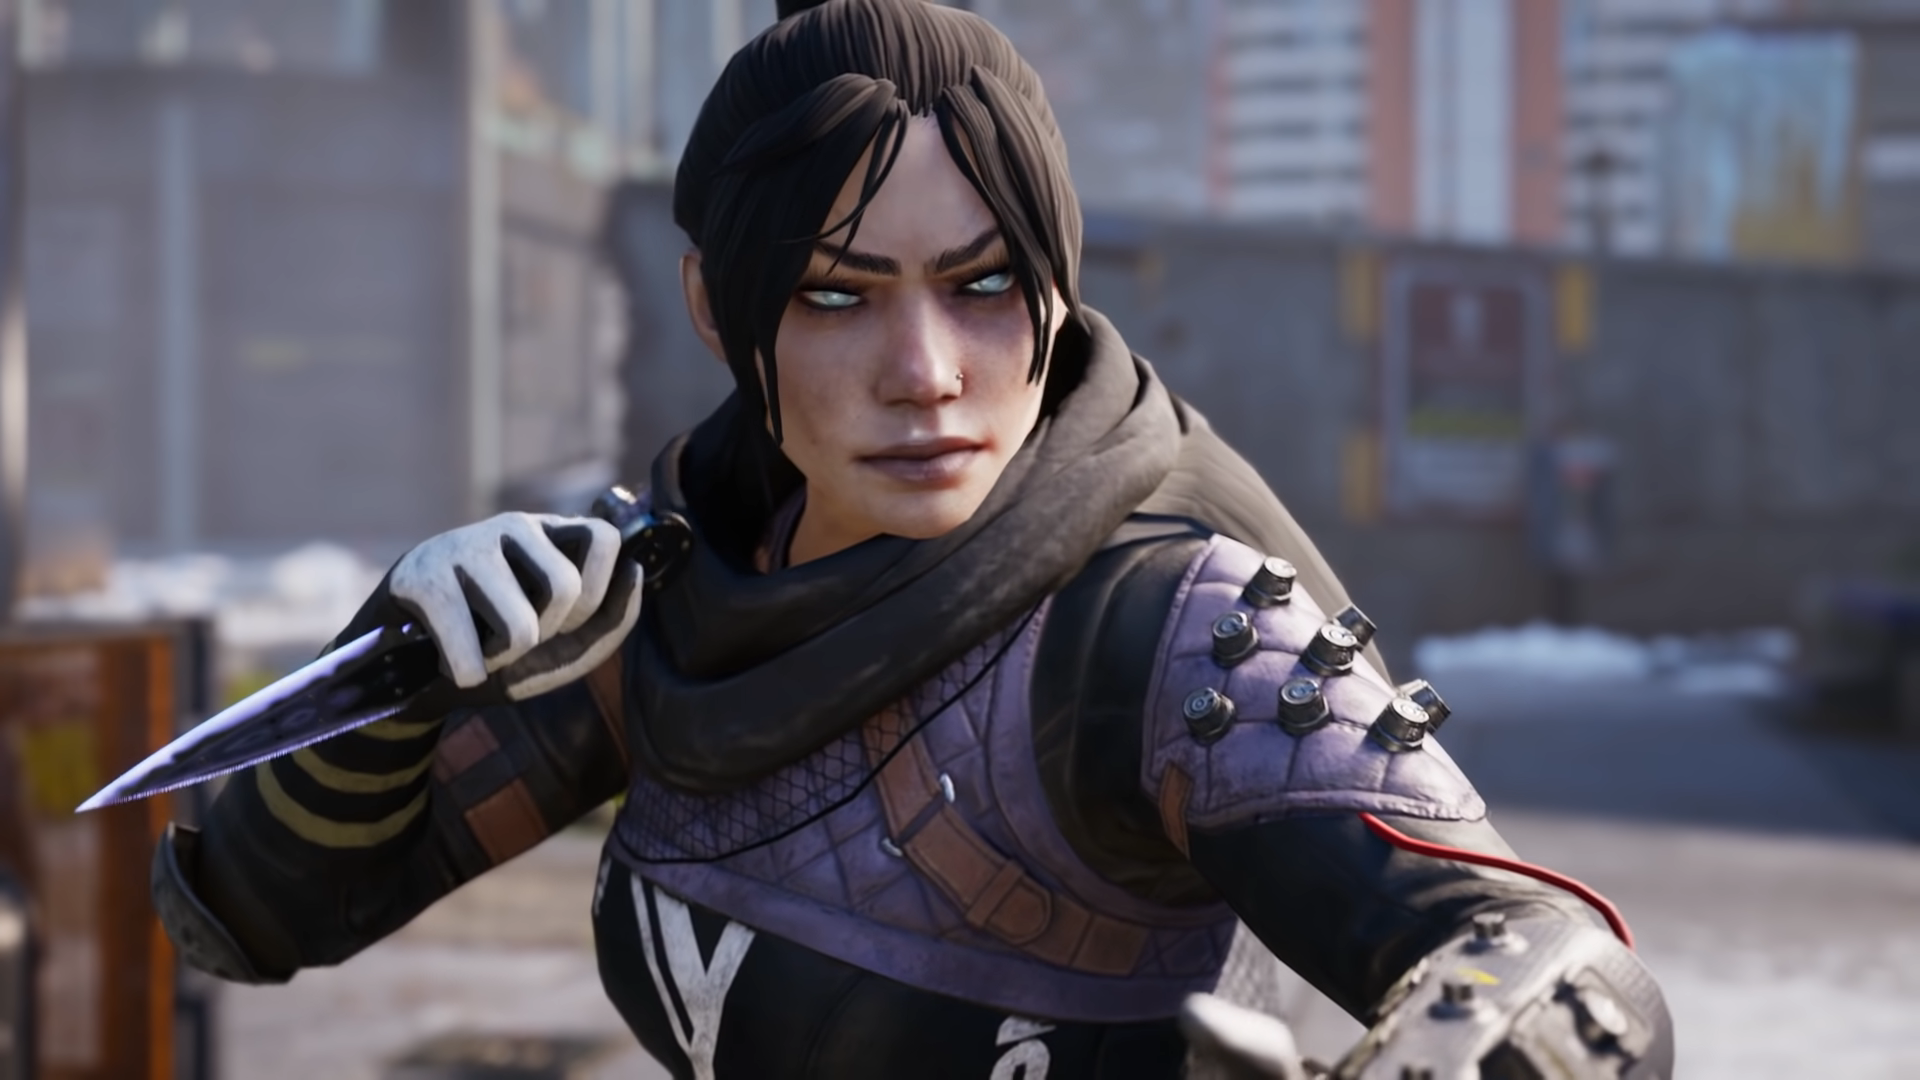 Apex Legends Mobile for Android review: The game you love with a few  concessions